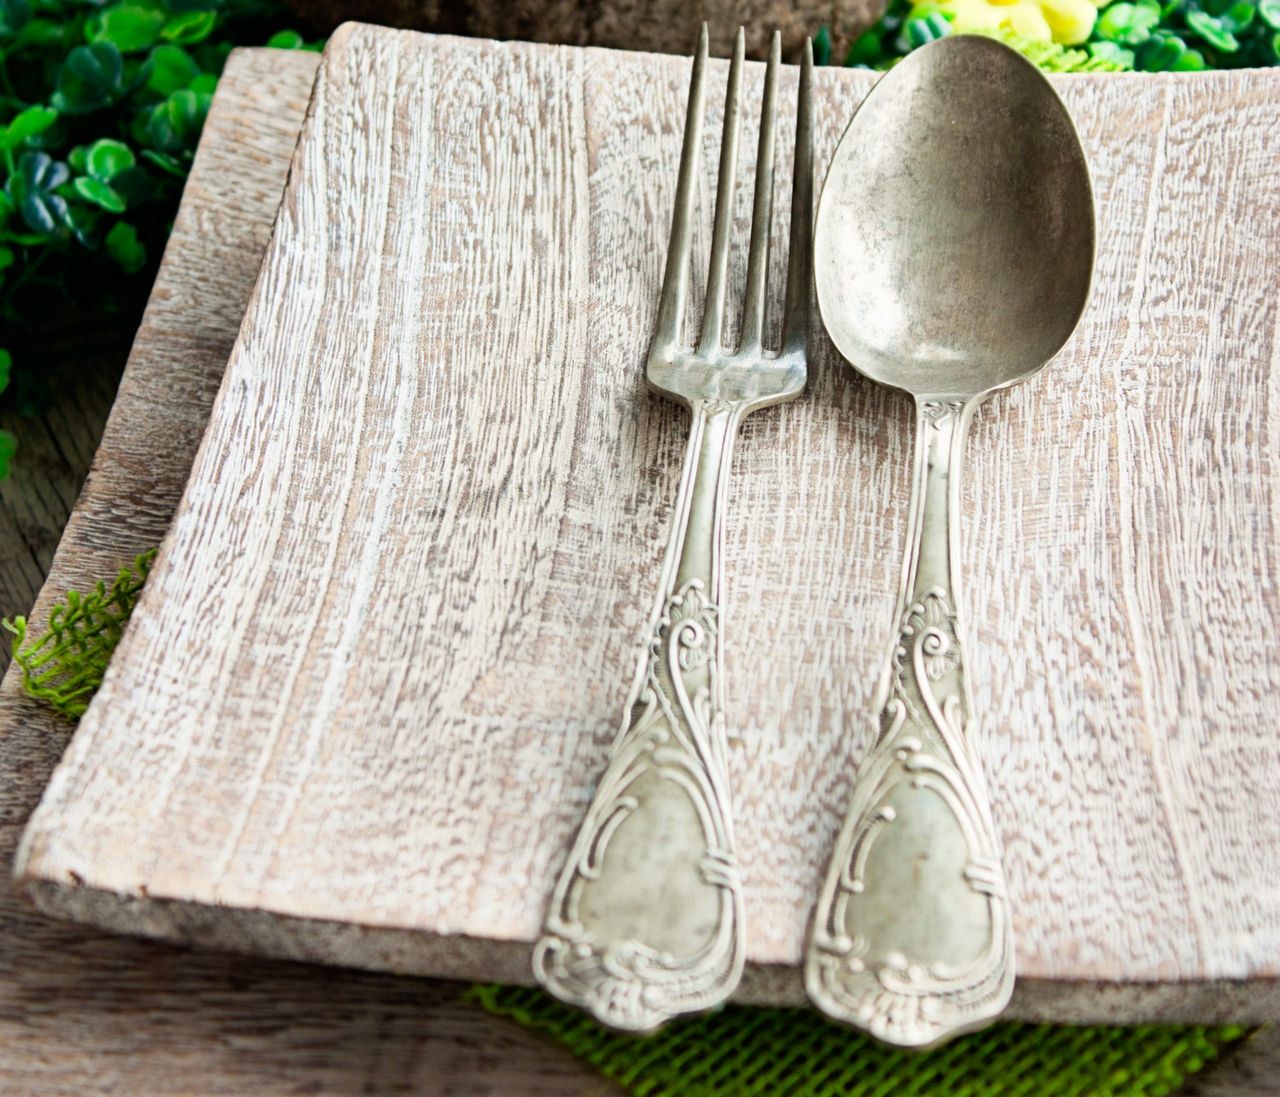 Restaurant menu series. Easter place setting. Fork and knife in rustic country table setting